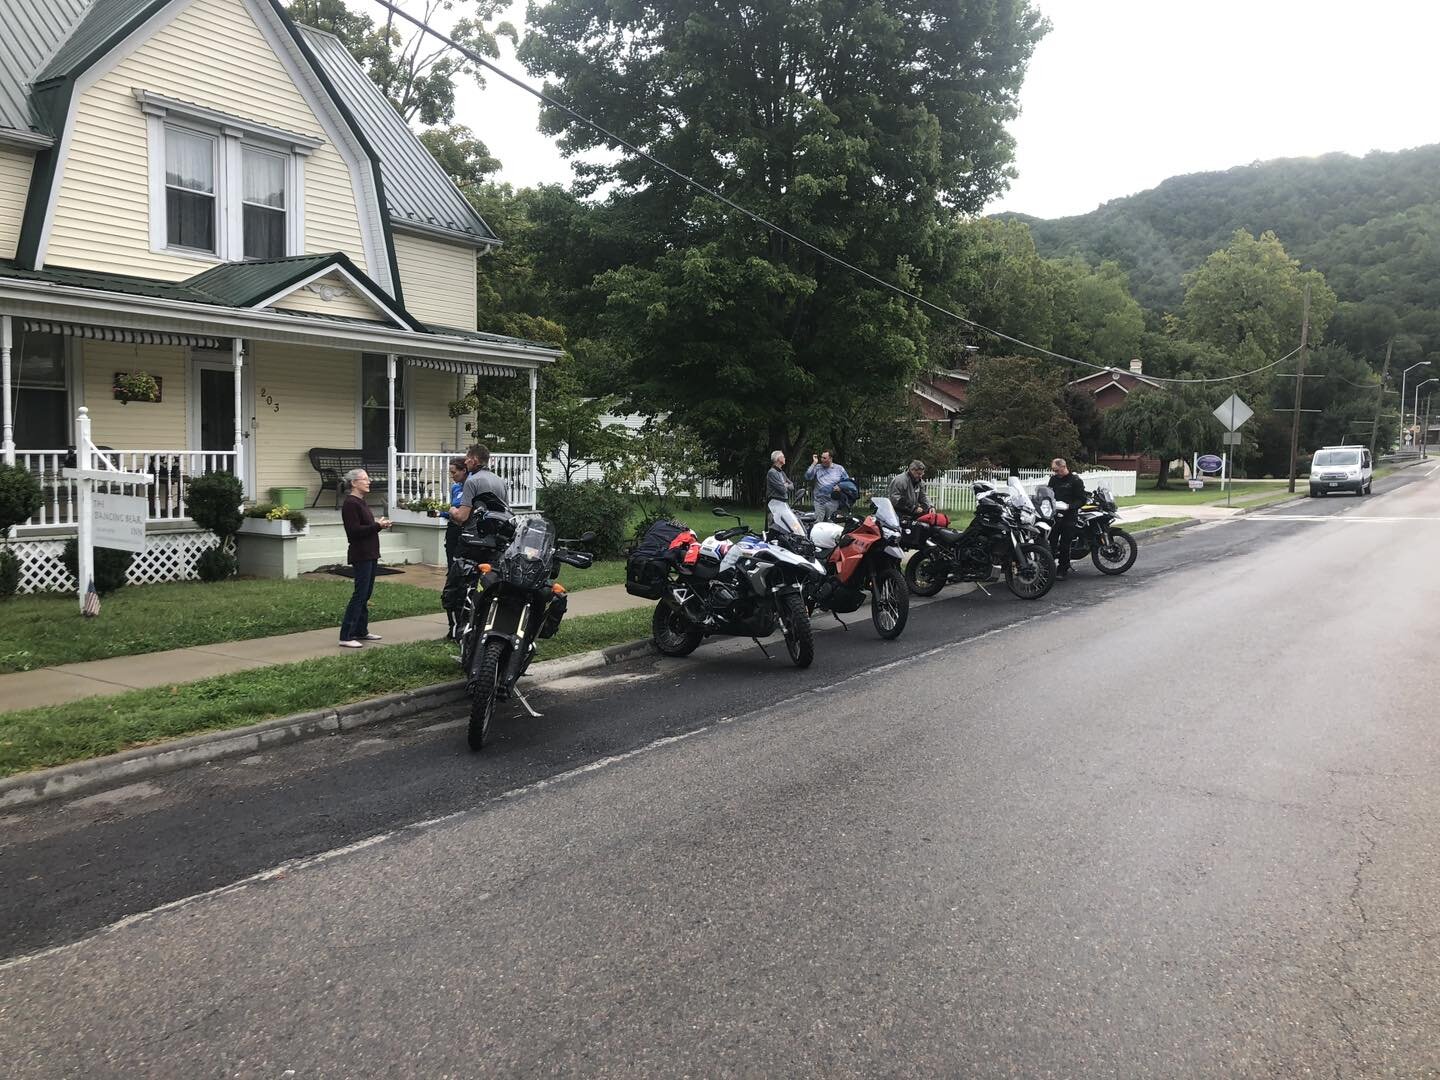 2022 brought 23 BDR rider nights to The Dancing Bear. Our commitment to give back and support the route will donate $230. Thank you riders!
.
.
.
.
.
.
#ridebdr #Damascus #damascusva #advmotorcycle #TheDancingBear #visitdamascusva #damascusvirginia